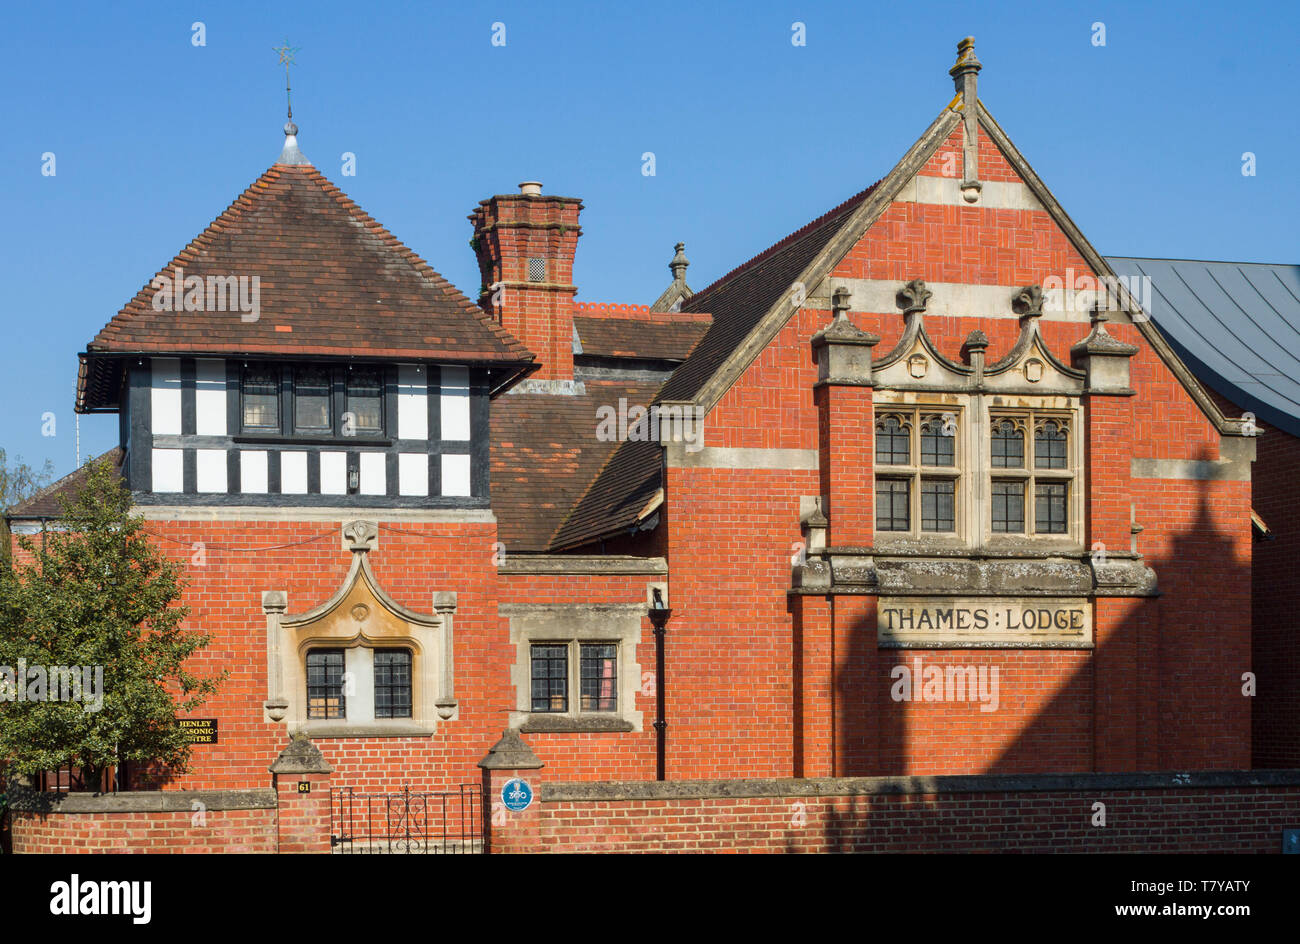 Thames Lodge, a Victorian Masonic Lodge building and home to the Thames Lodge branch of the Freemasons in Henley-on-Thames. Stock Photo